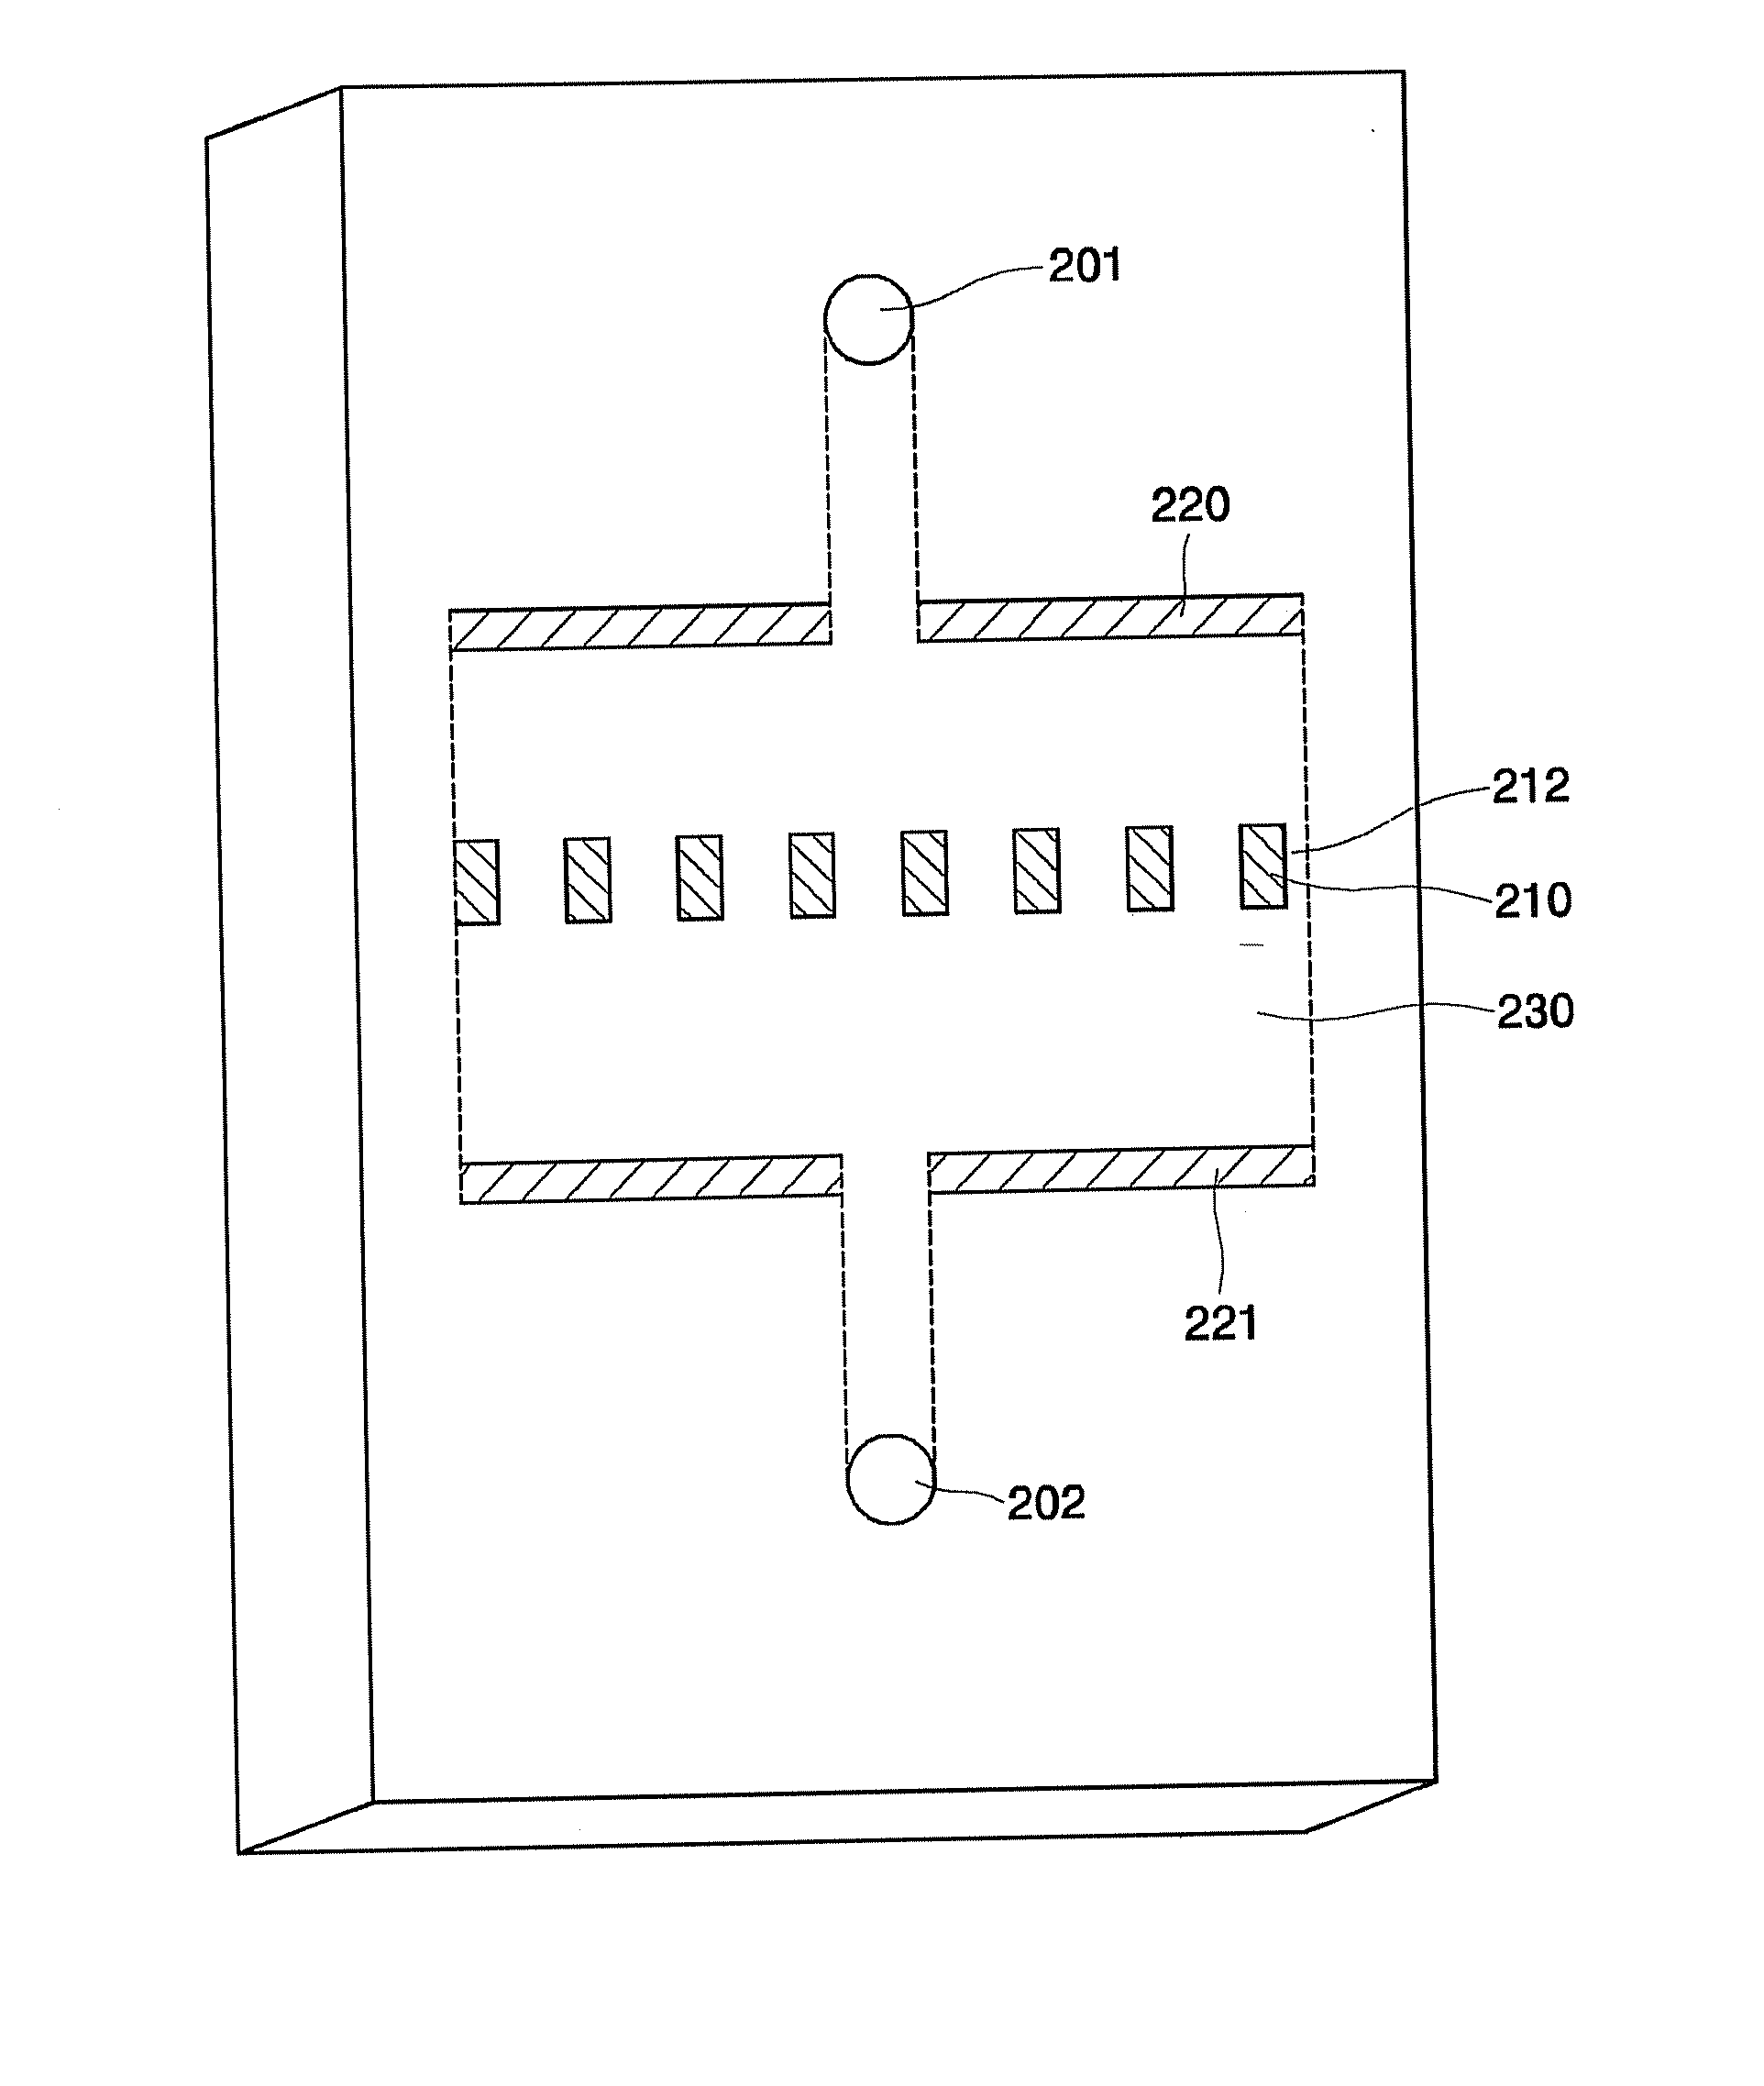 Apparatus for and method of separating polarizable analyte using dielectrophoresis